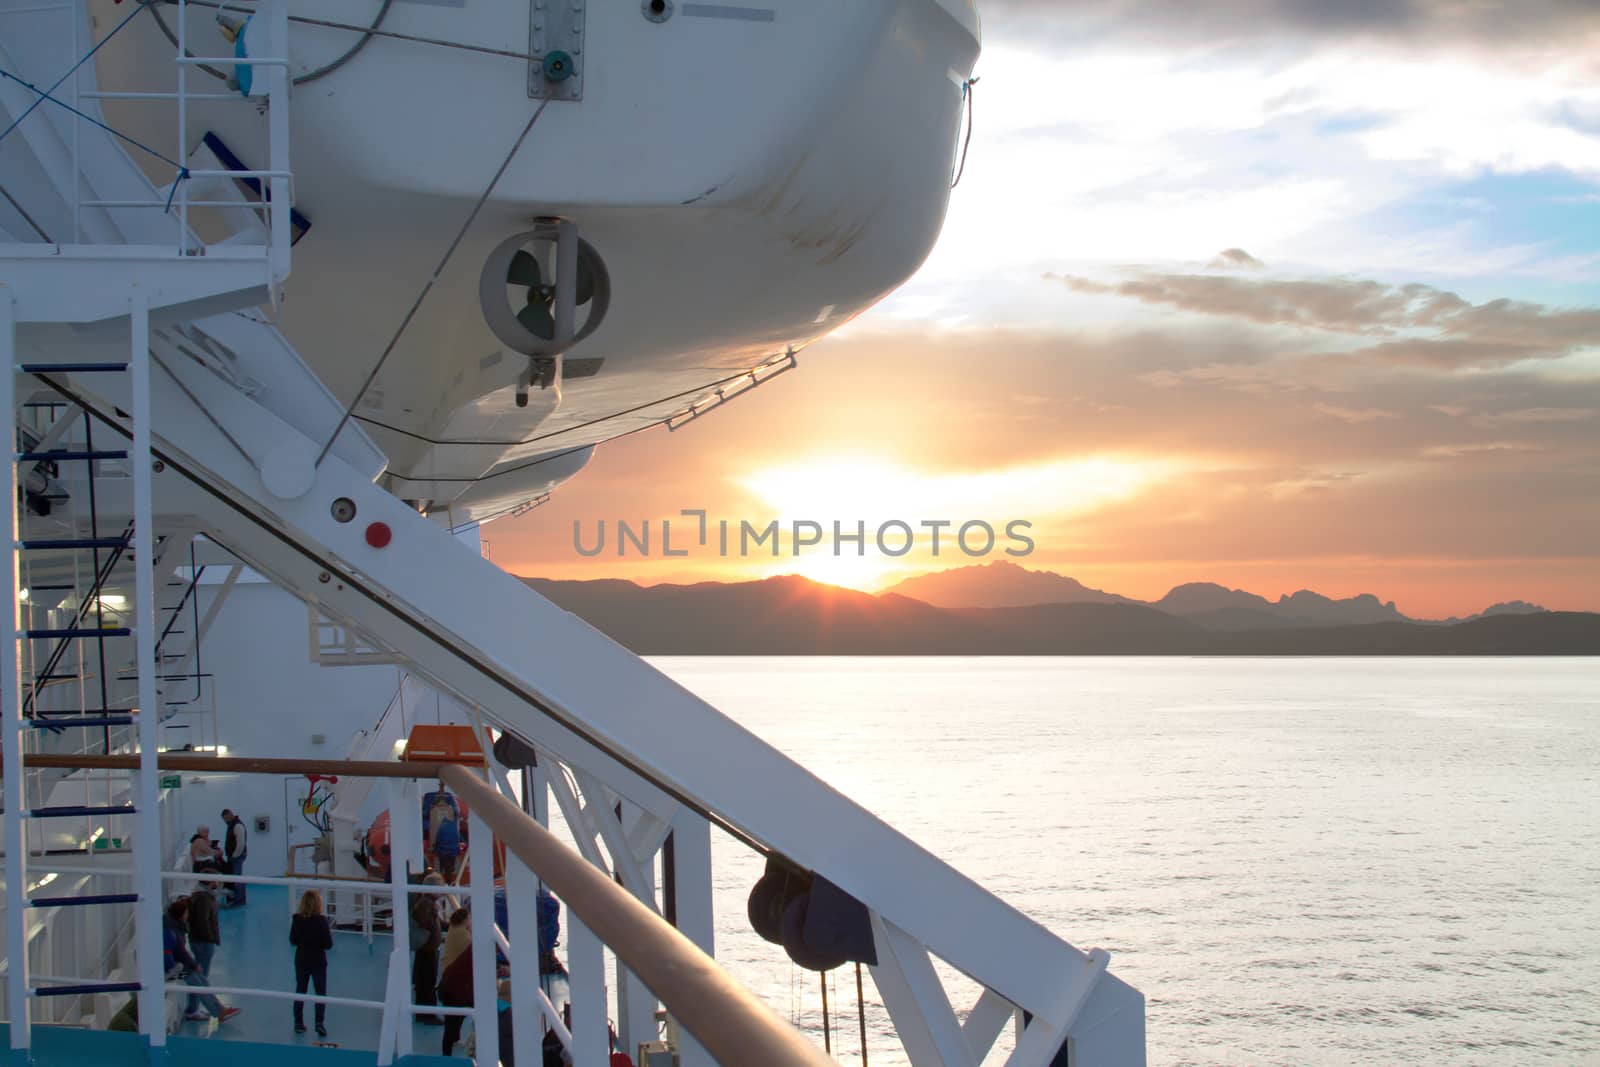 Sunrise on the Sardinian sea coast with intense orange color seen from the sea on the ferry that is about to dock and people on board